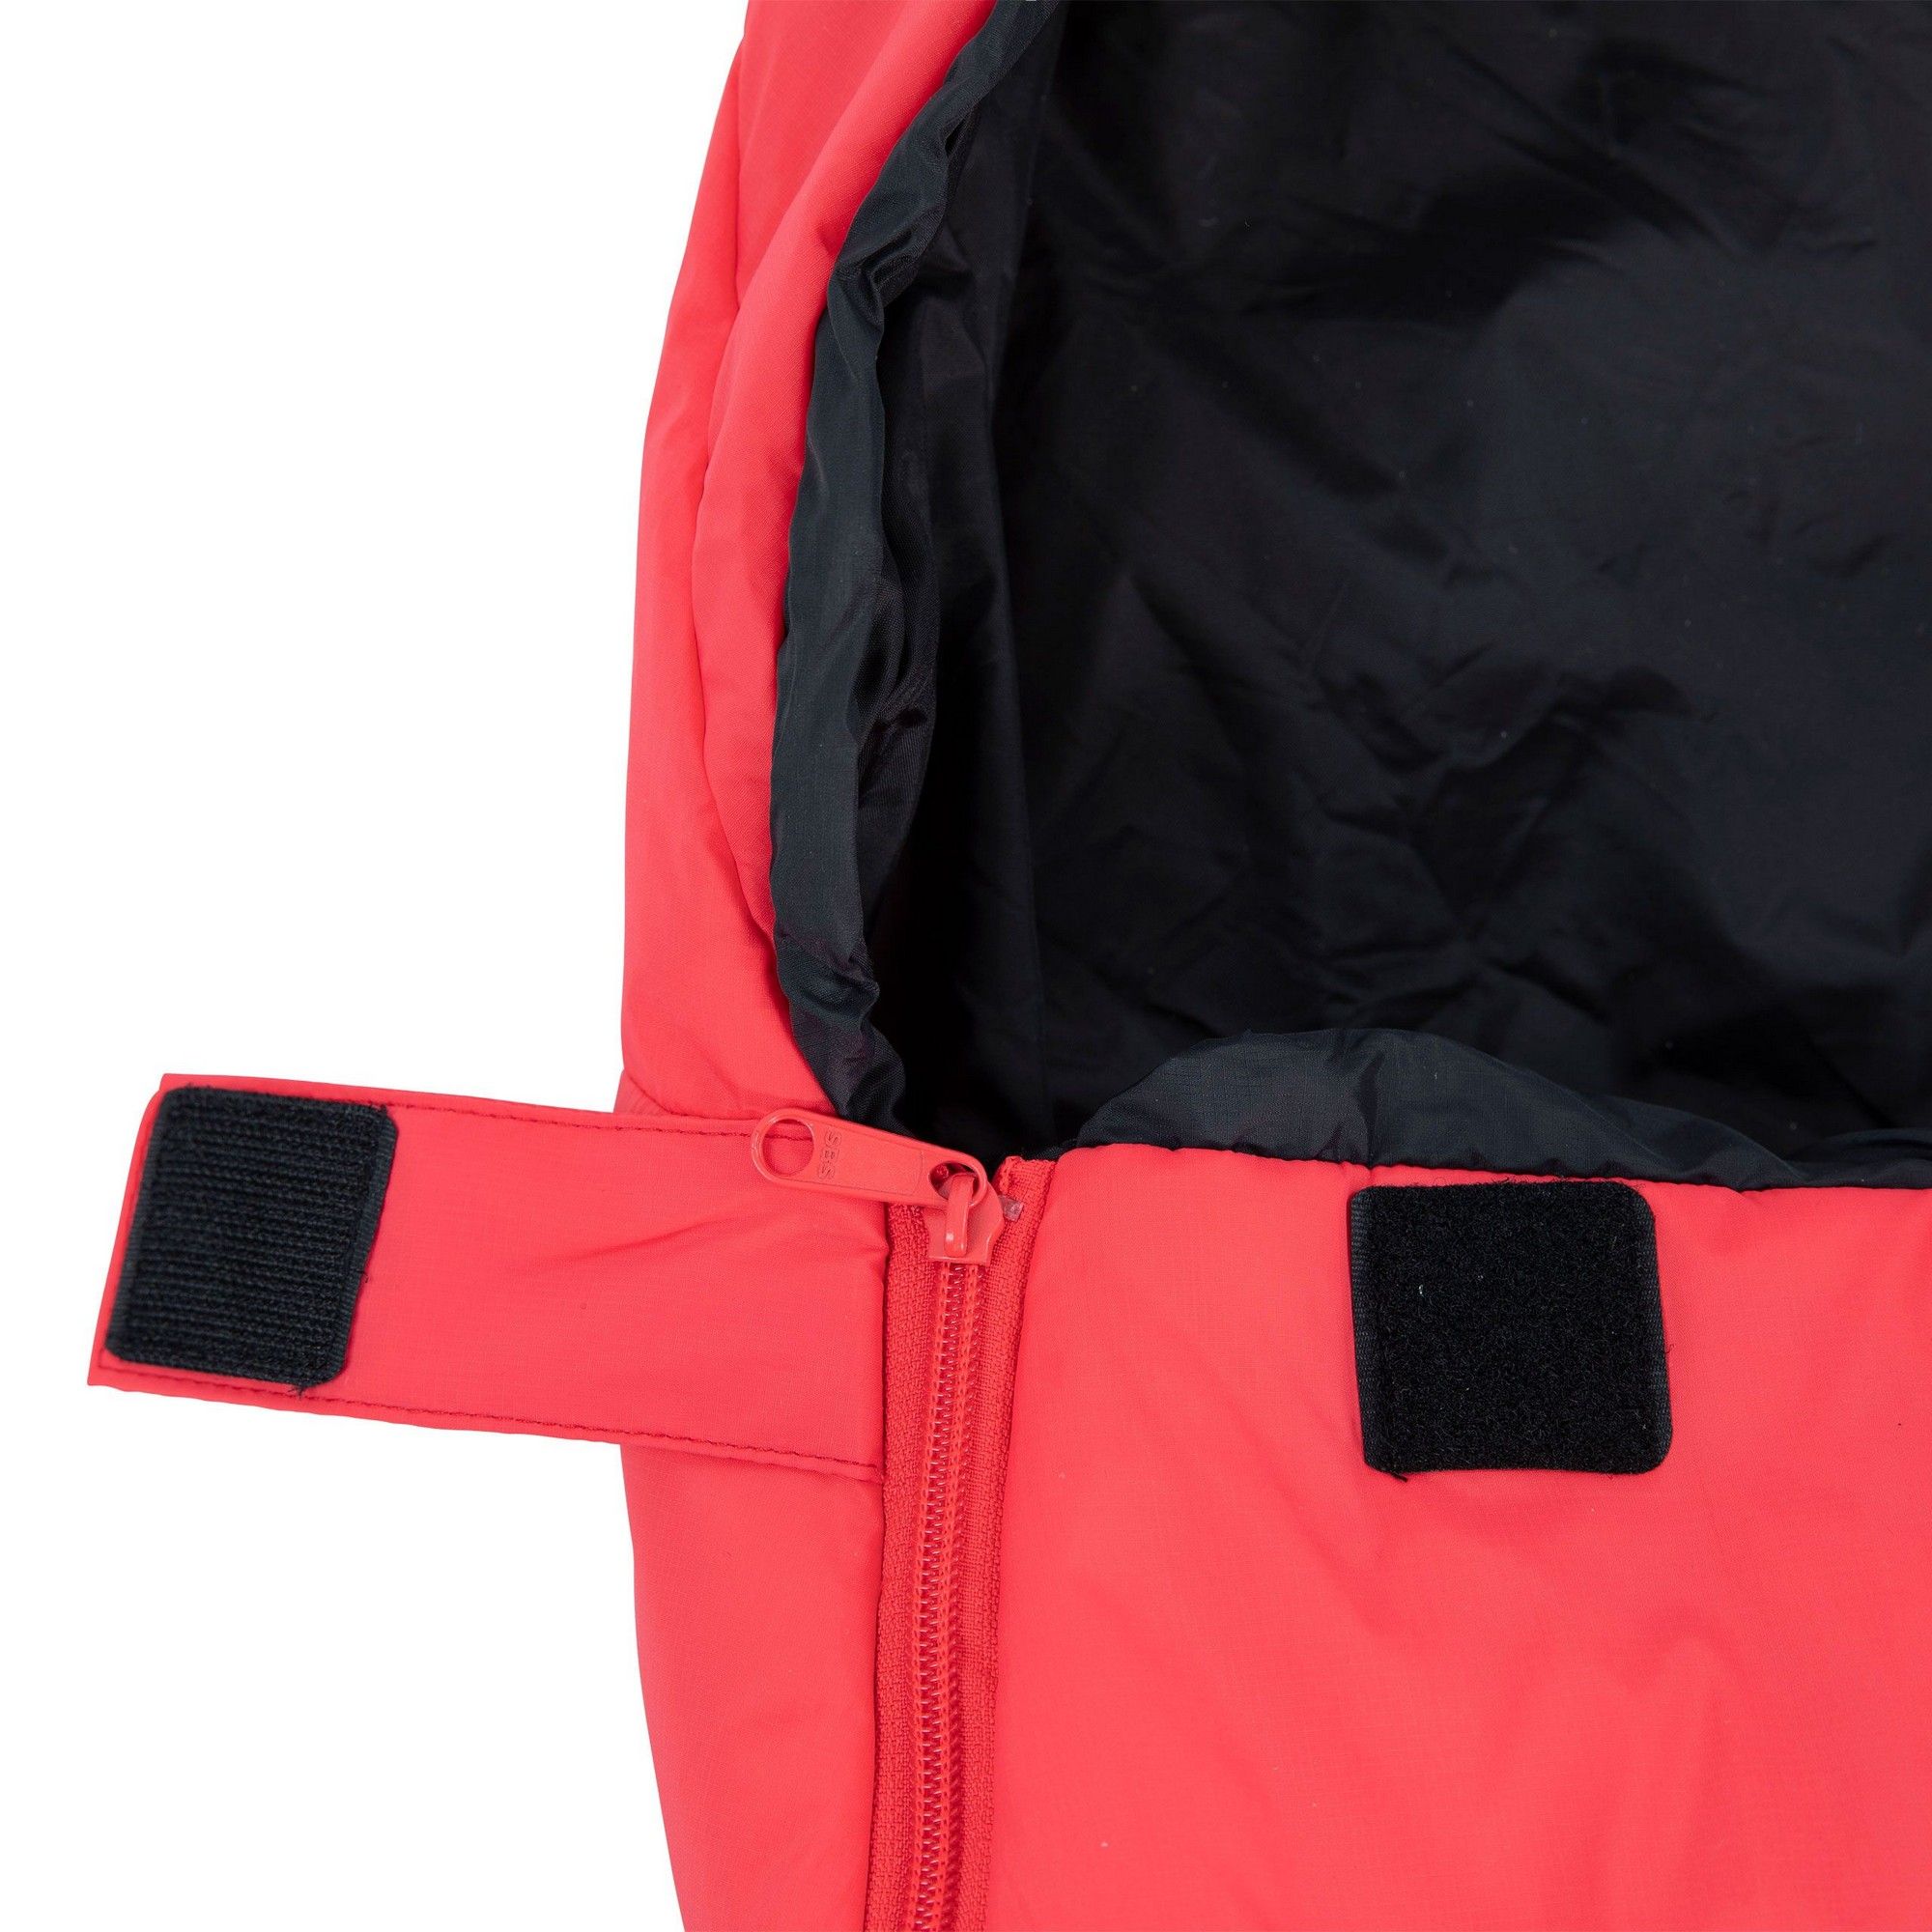 100% Polyamide. Shoulder Baffle. Fabric Technology: Thermolite , Water Resistant.